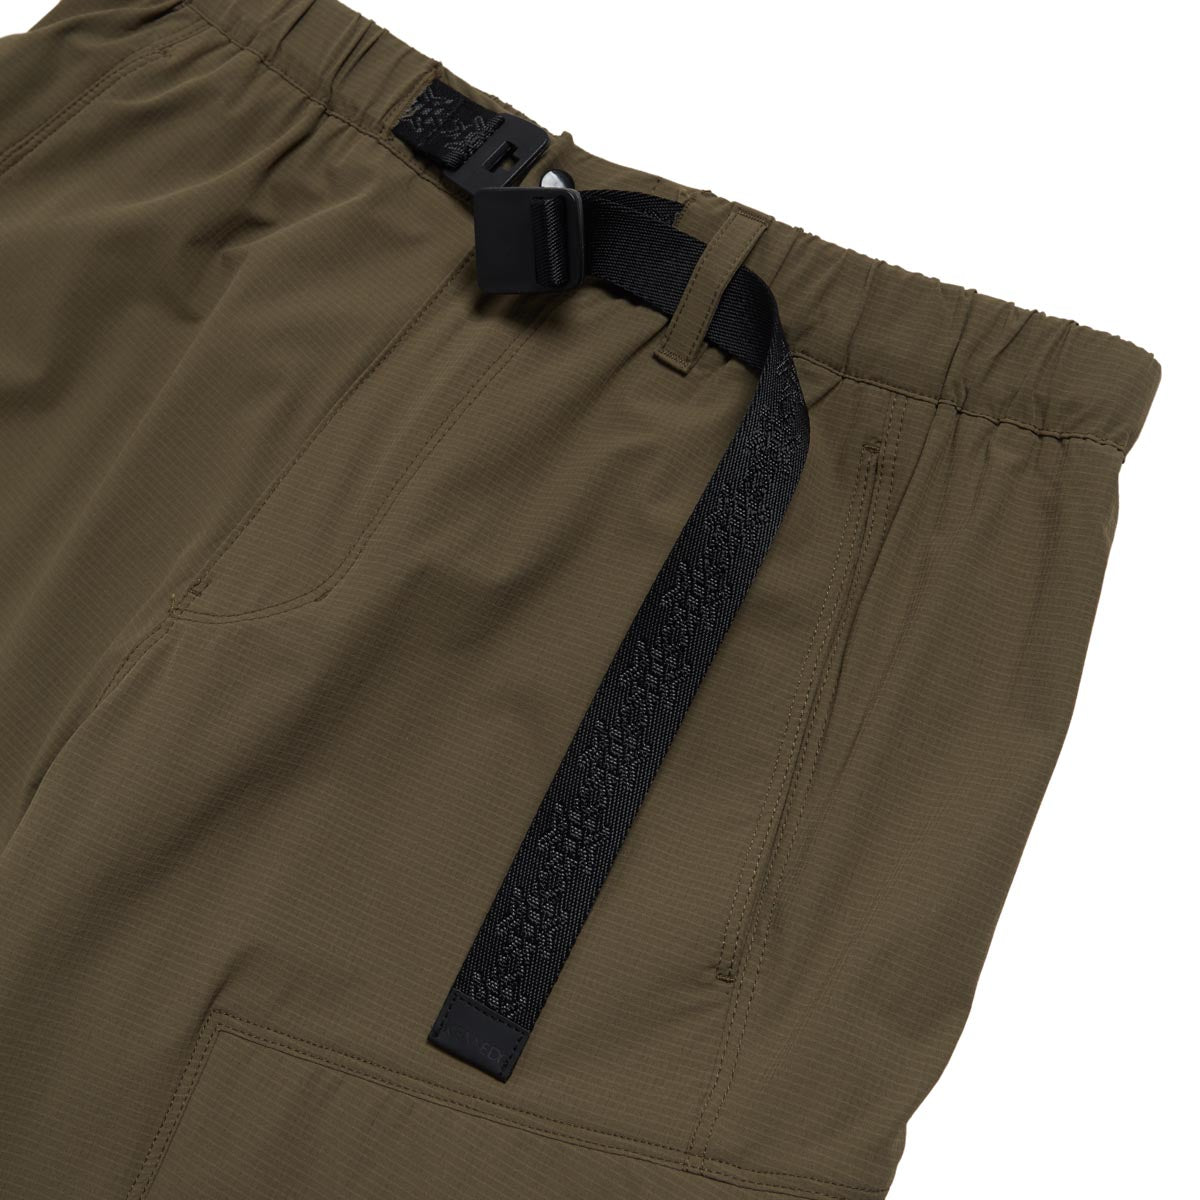 Kennedy The Ascension Cargo Pants - Wet Sand image 4